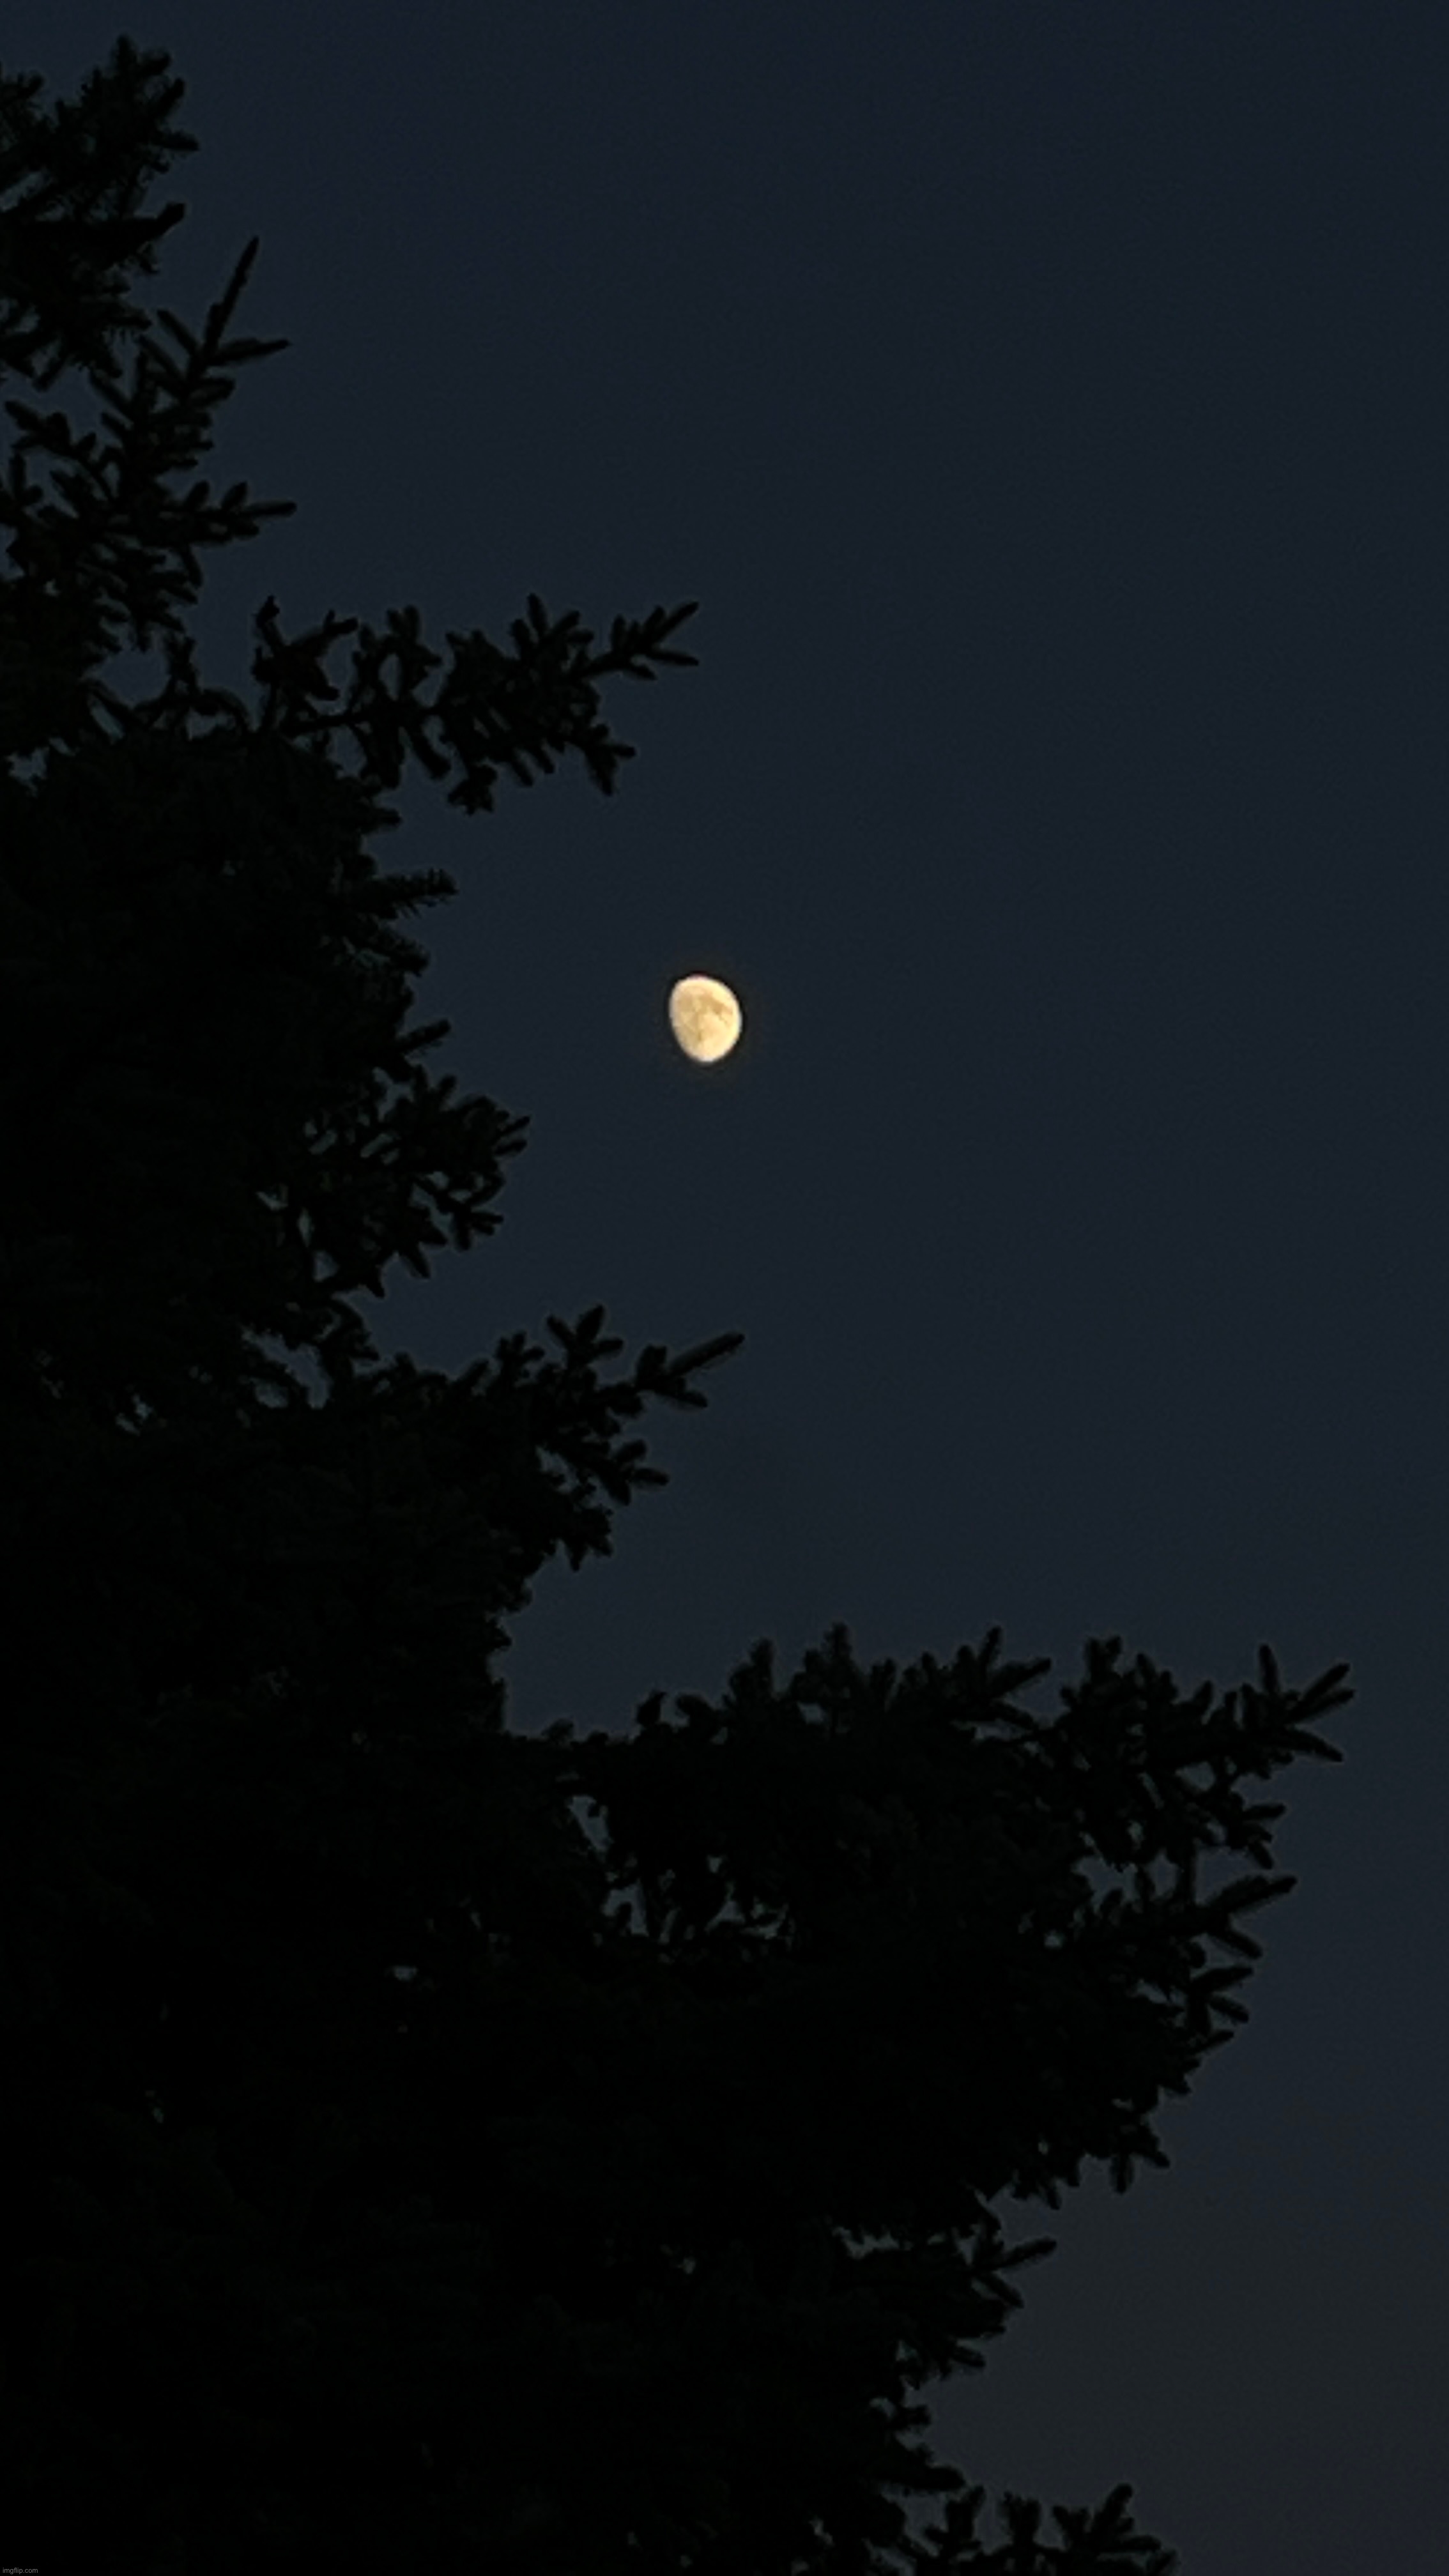 my new best moon pic | image tagged in share your own photos,moon,luna,photos | made w/ Imgflip meme maker